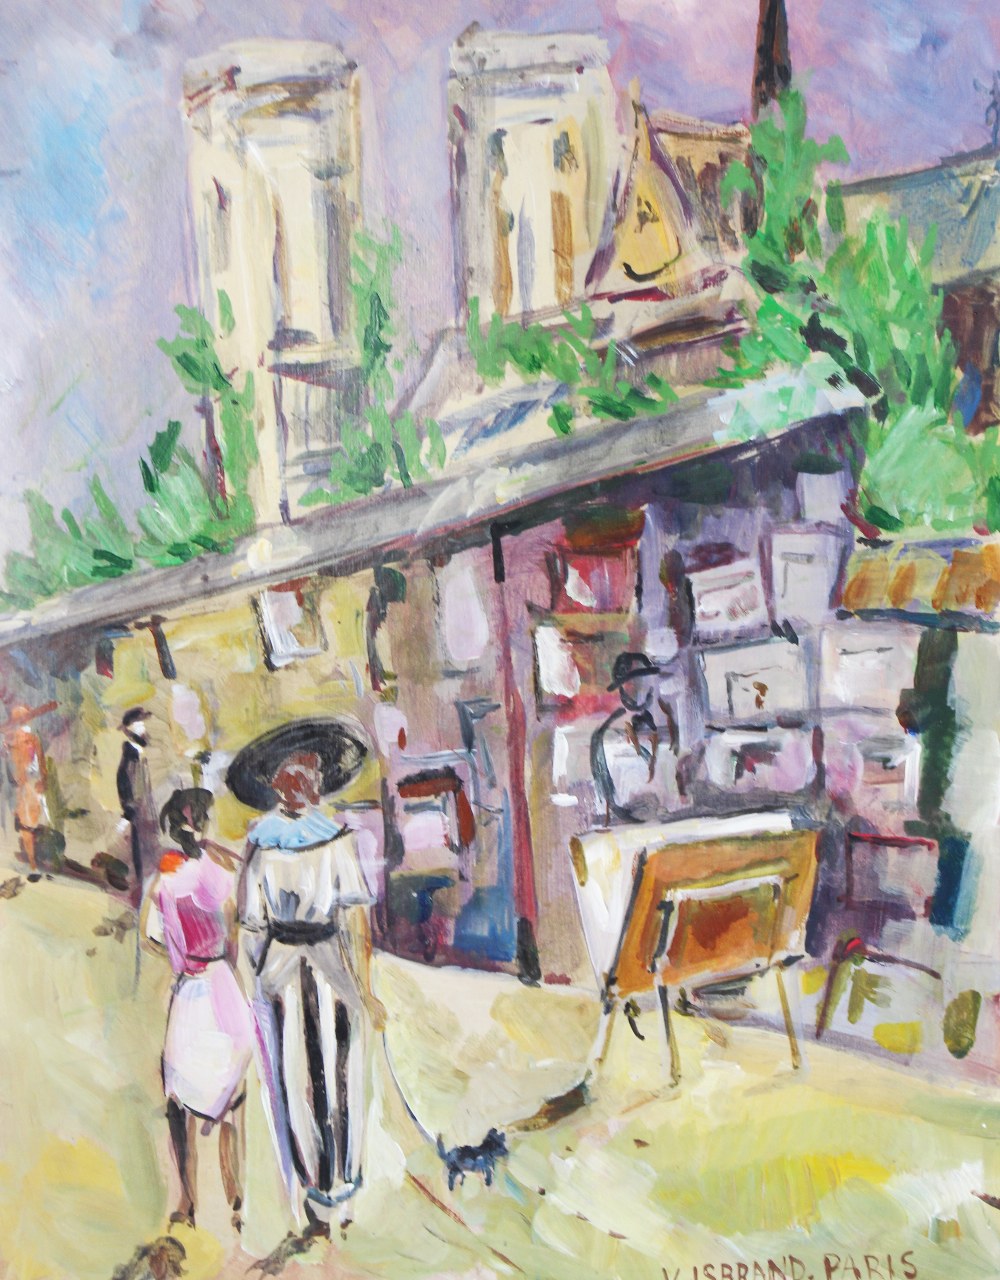 Attributed to Victor Isbrand (Danish, 1897 - 1989), A Parisian street scene, Oil on board, Signed "